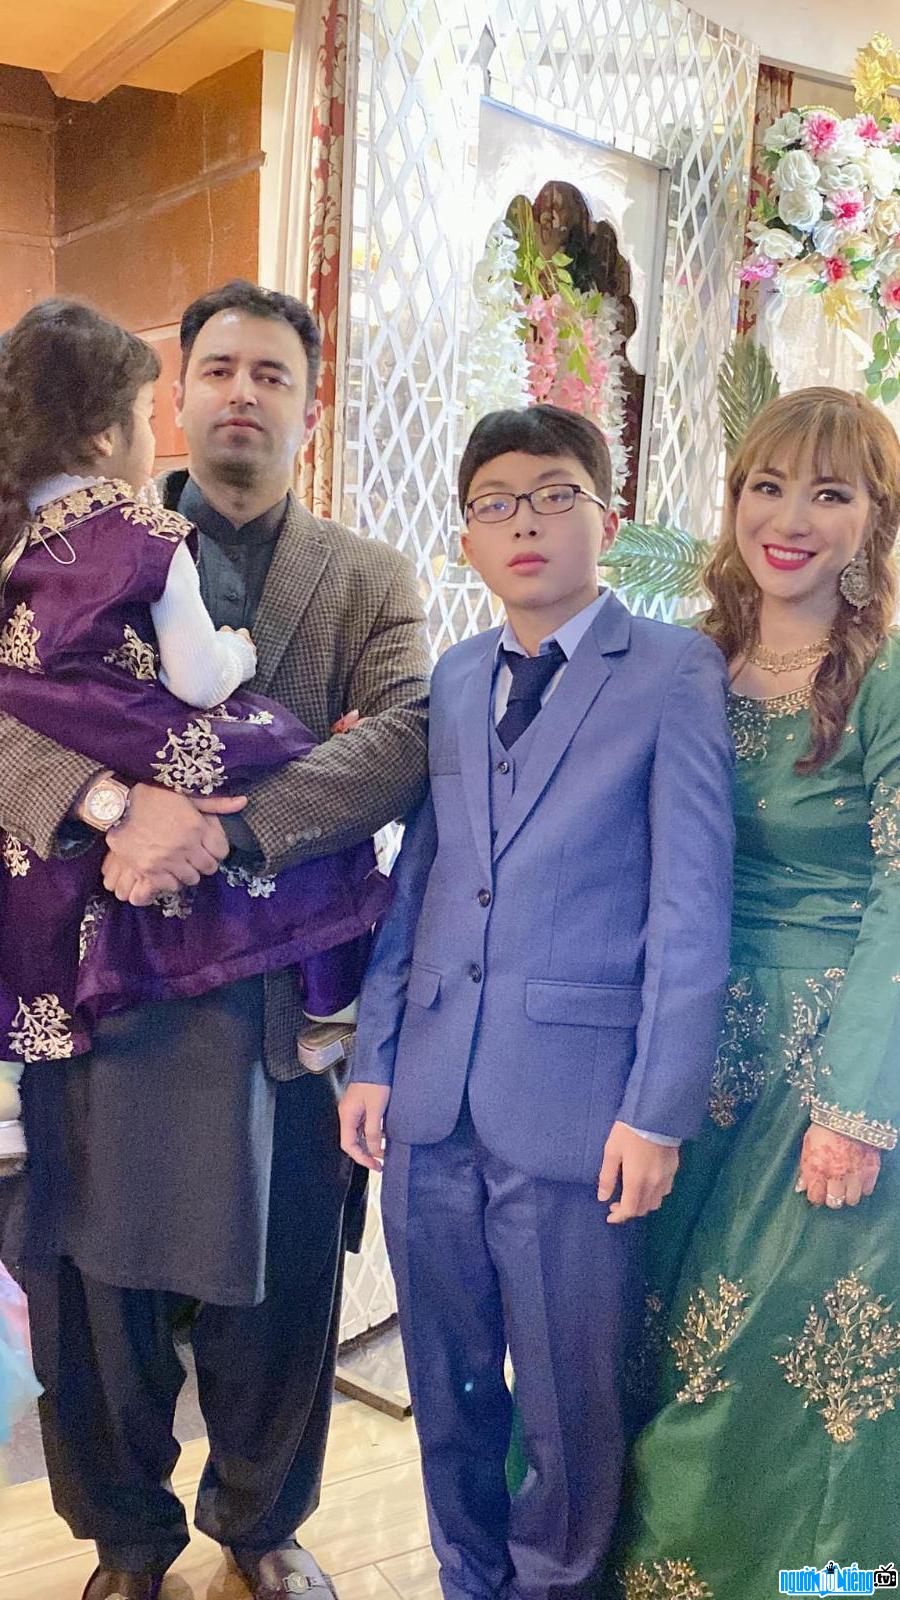 Picture of Trang and her husband with their son and daughter